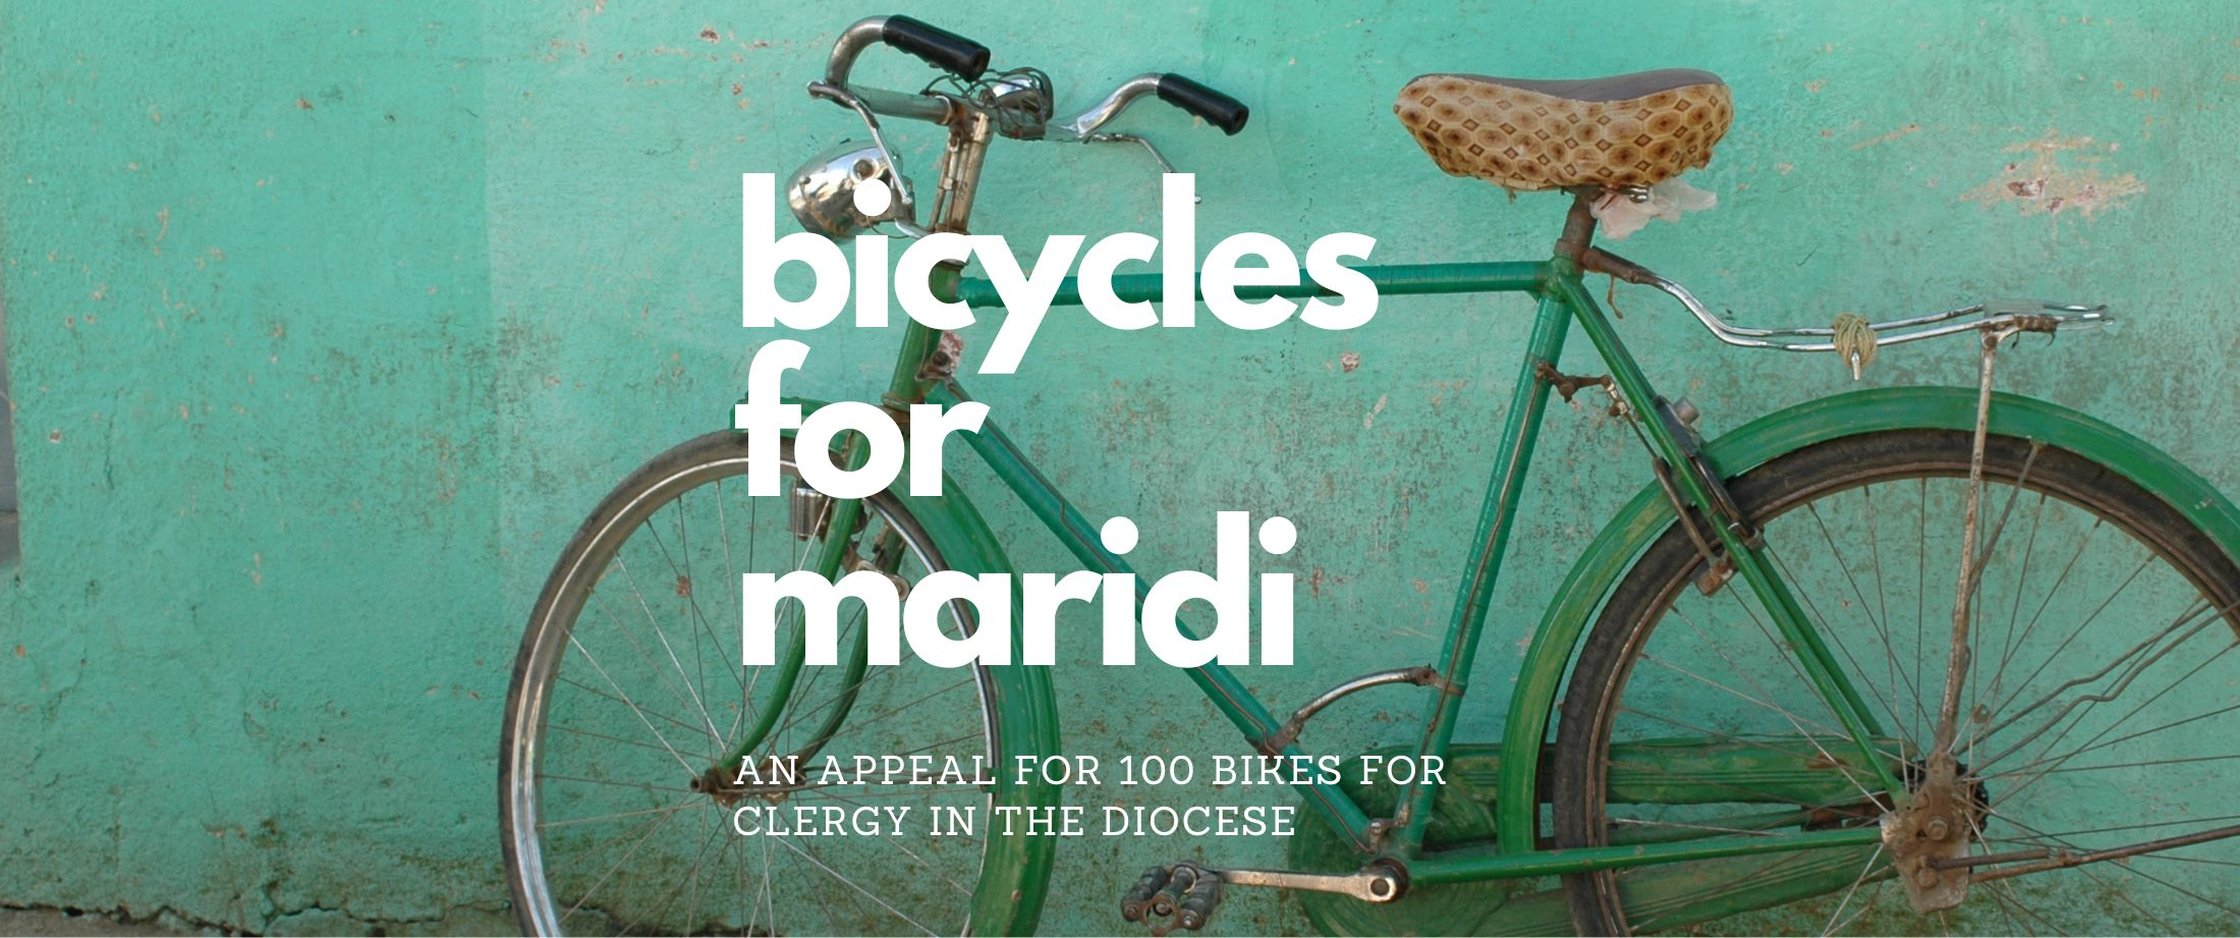 Bicycles for Maridi